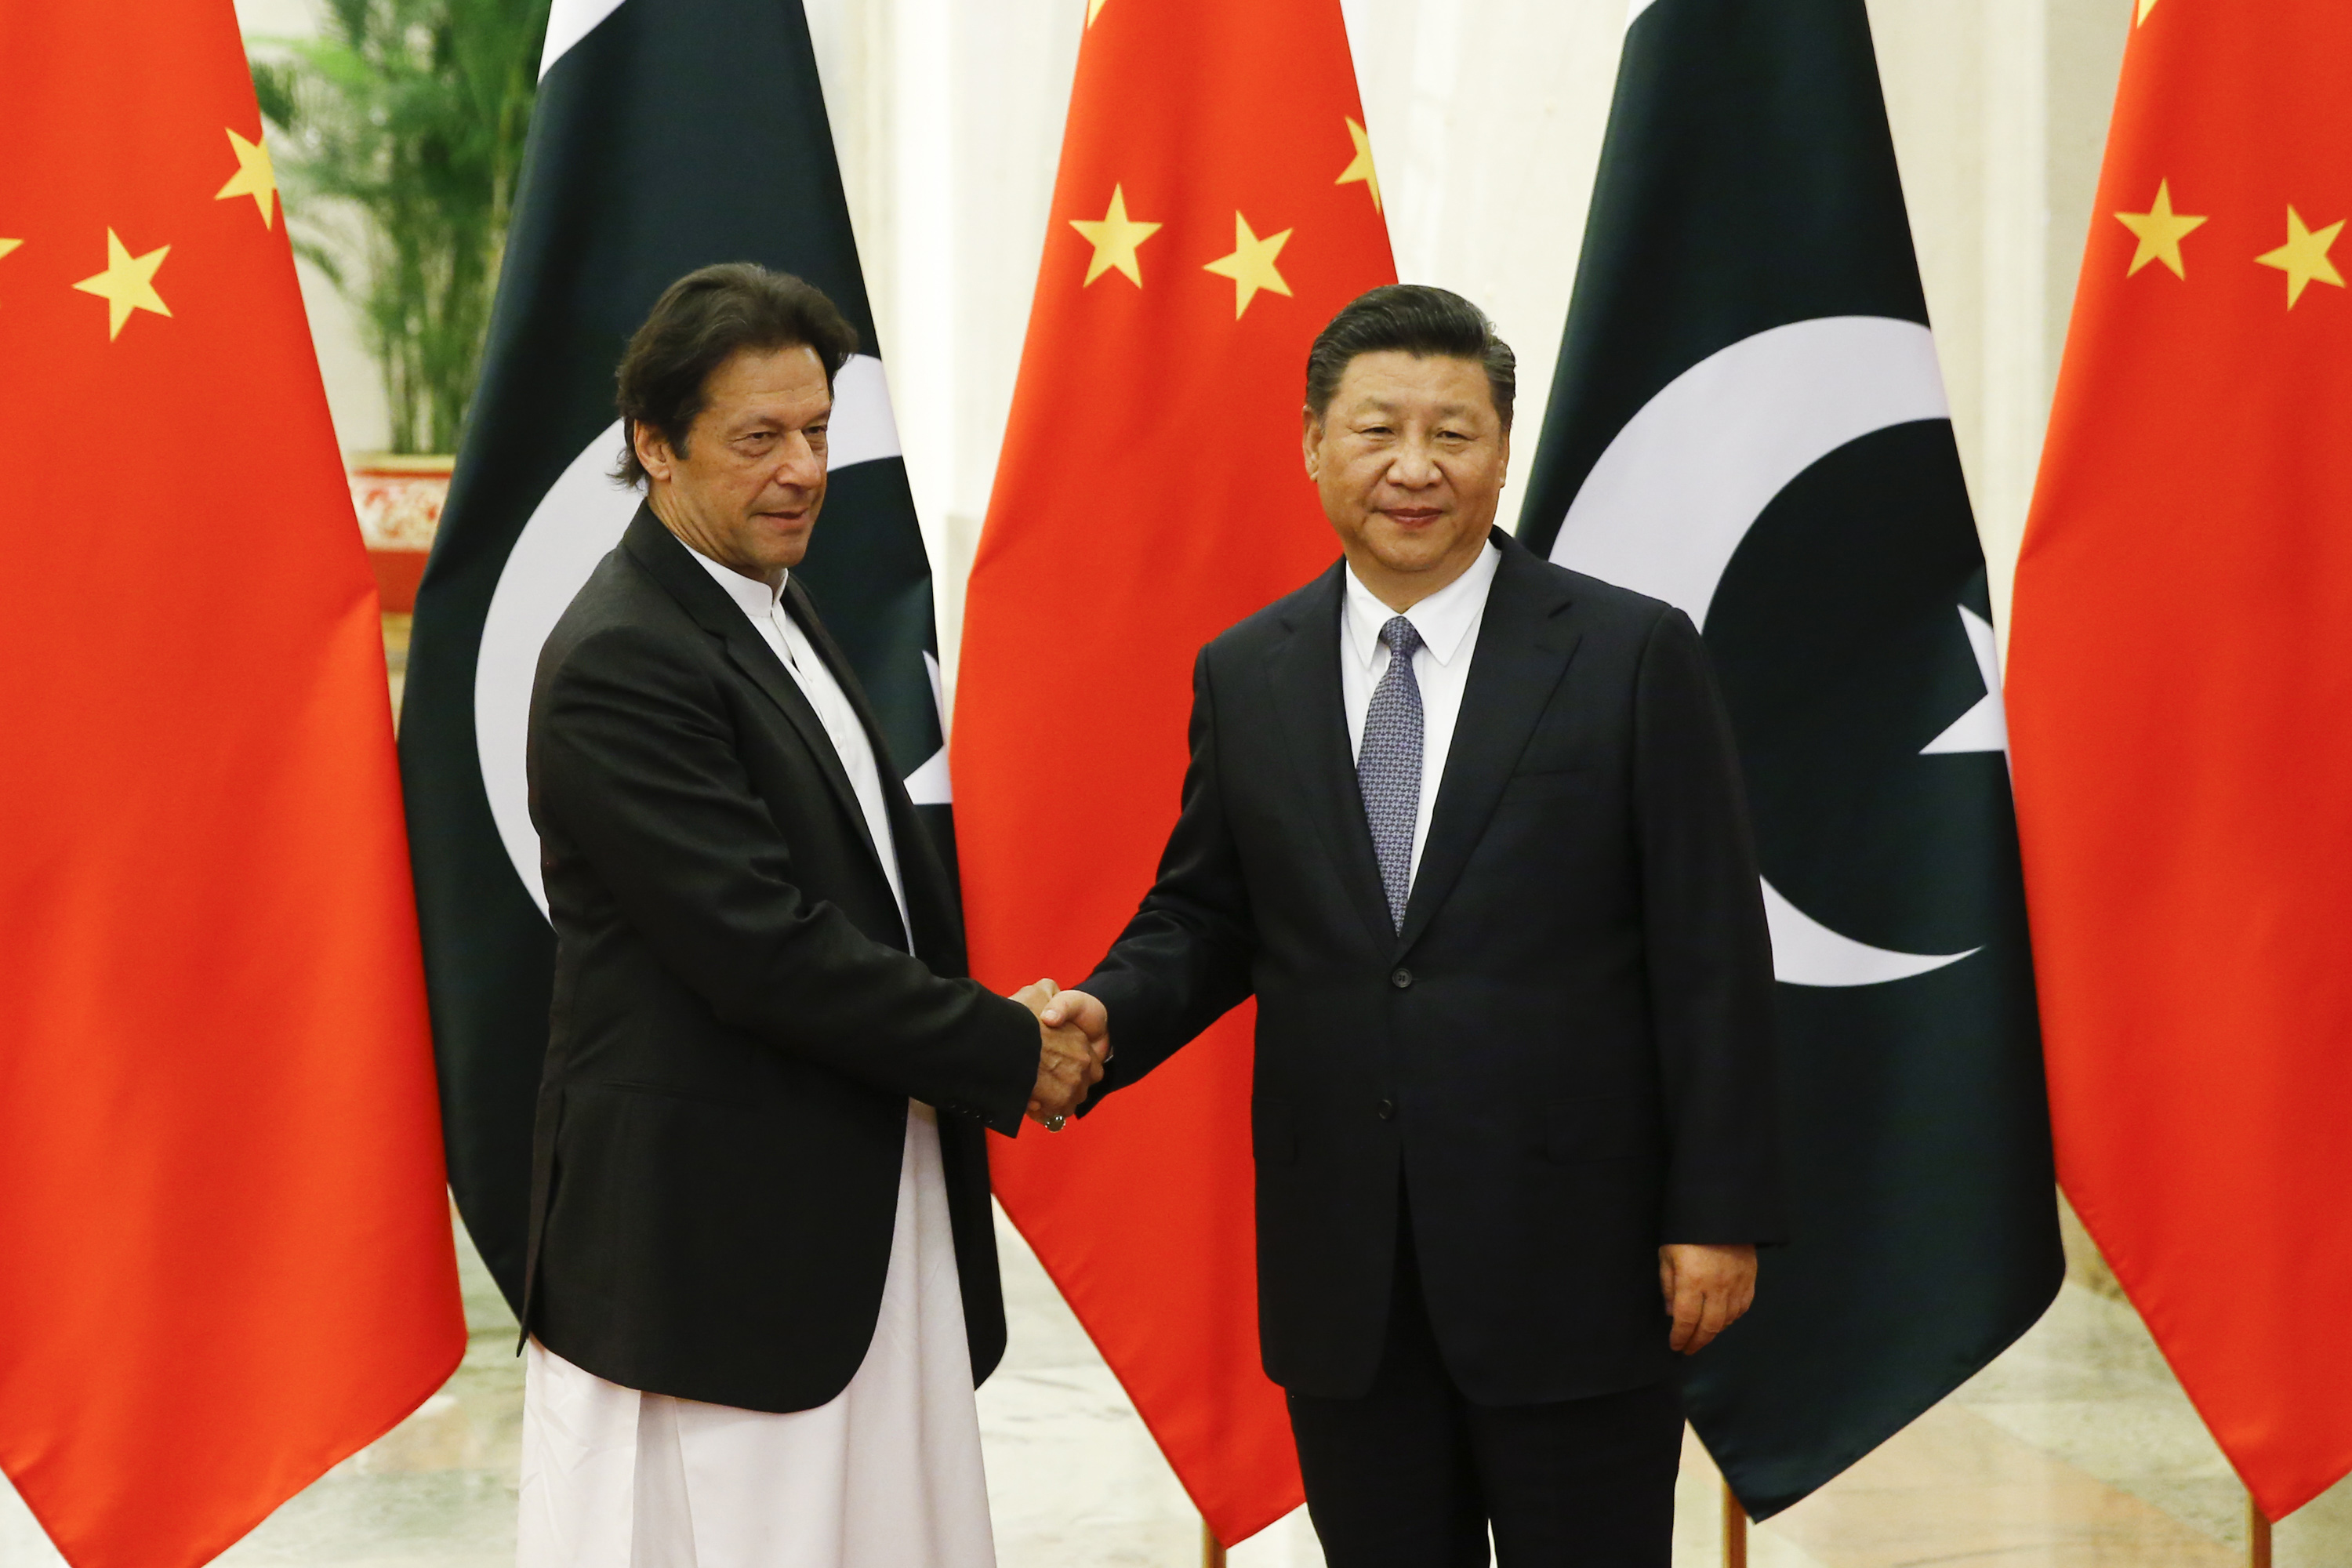 China's President Xi Jinping (R) shakes hands with Pakistan's Prime Minister Imran Khan at the Great Hall of the People in Beijing on November 2, 2018.